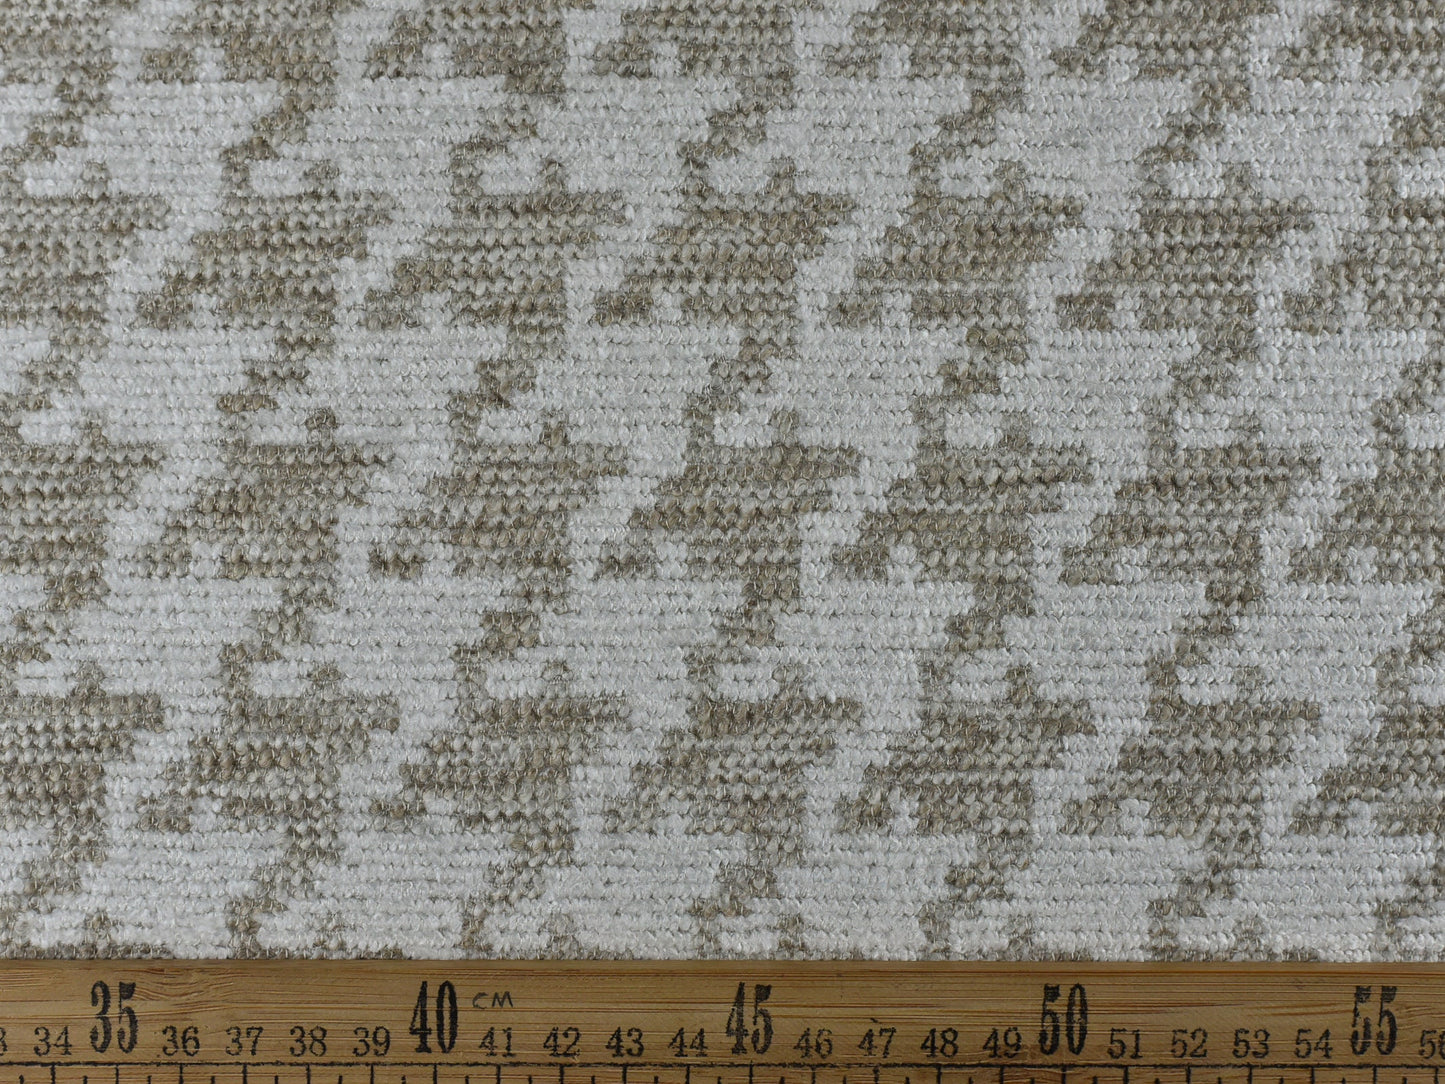 Premium Quality Vintage Woven Large Houndstooth Check Texture Upholstery Fabric By The Yard Wood Ash